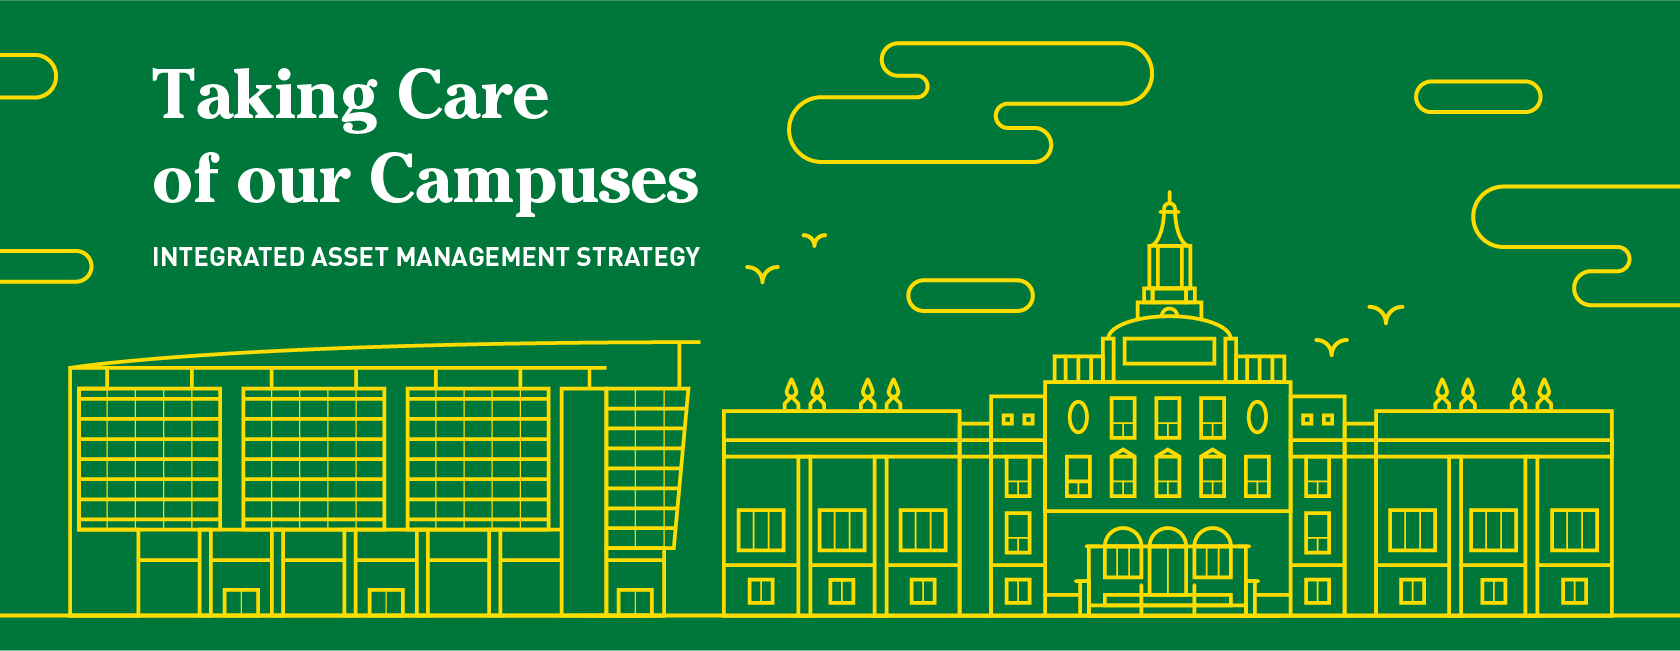 Taking care of our campuses: Asset Management Strategy. Illustrations of buildings